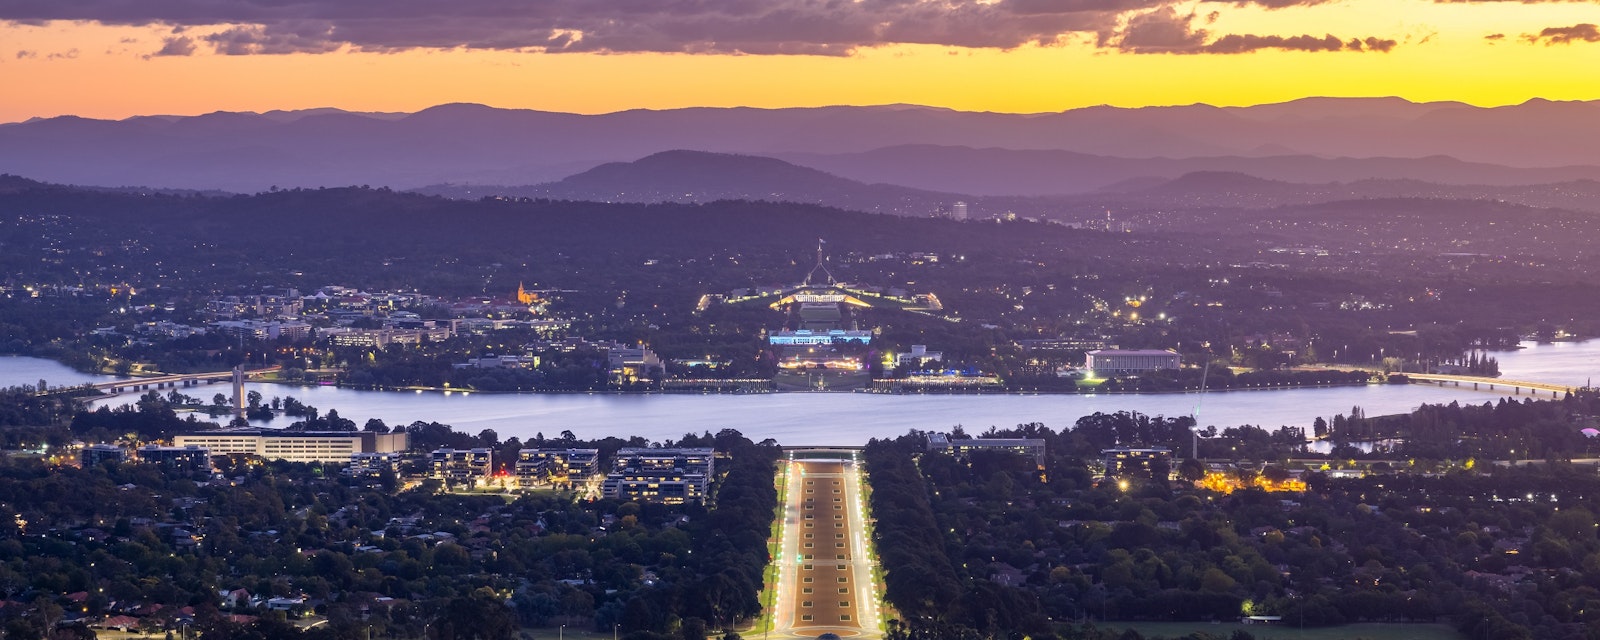 Canberra,Australia,Viewed,From,Mount,Ainslie,At,Sunset,Looking,Down